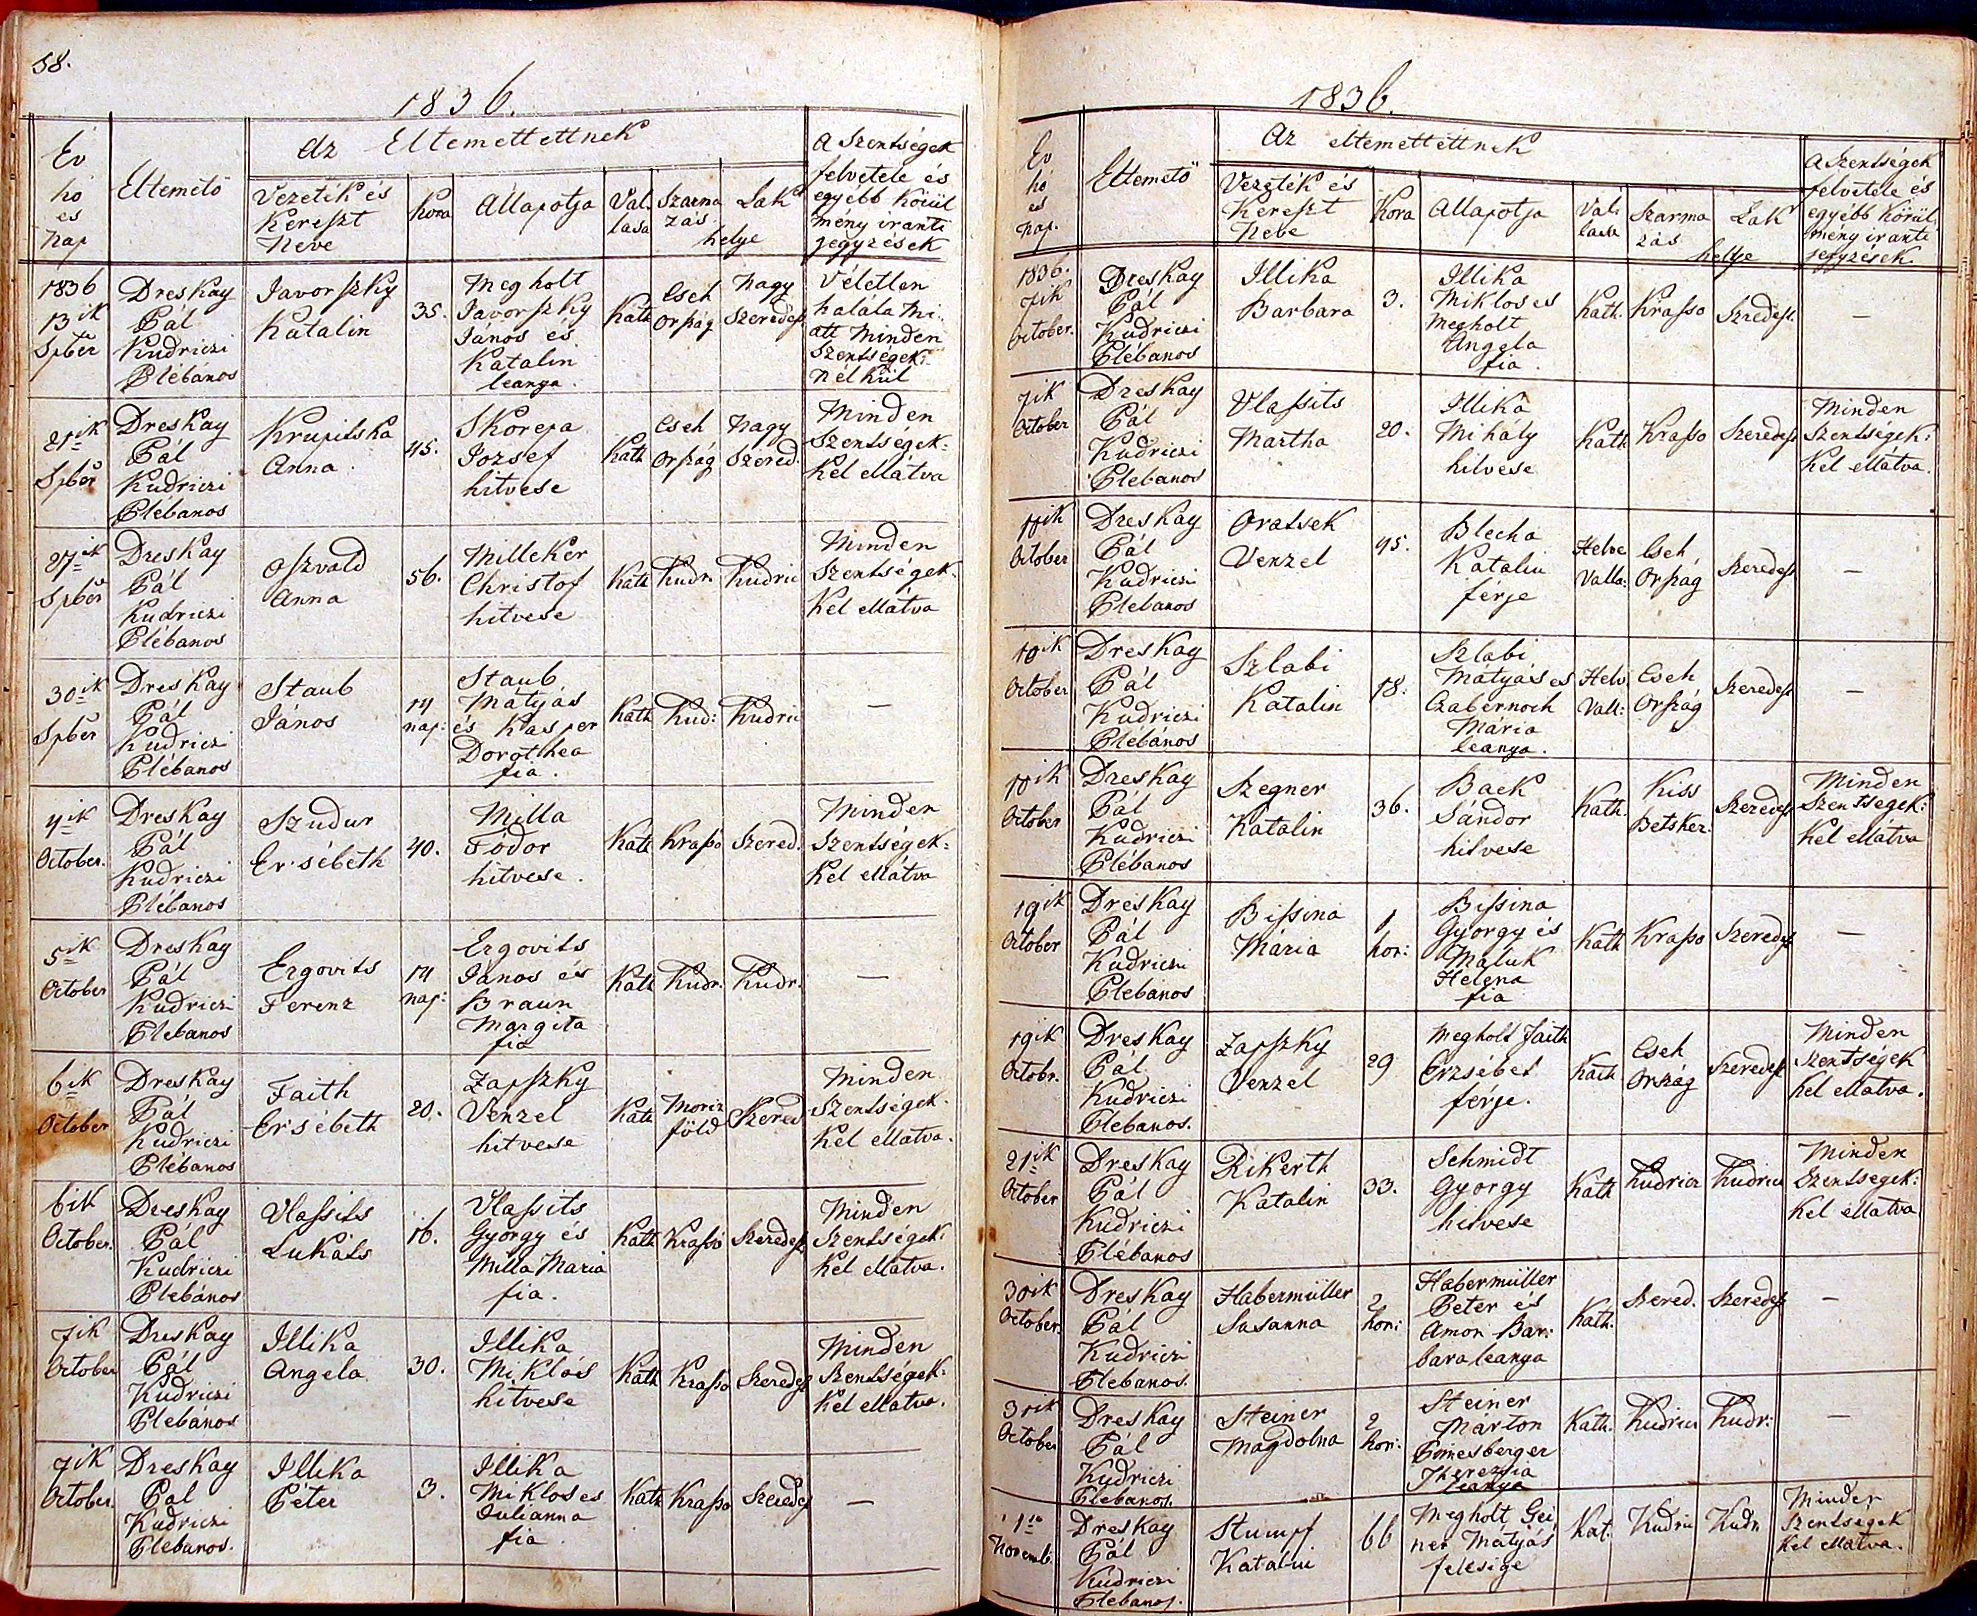 images/church_records/DEATHS/1775-1828D/058 i 059